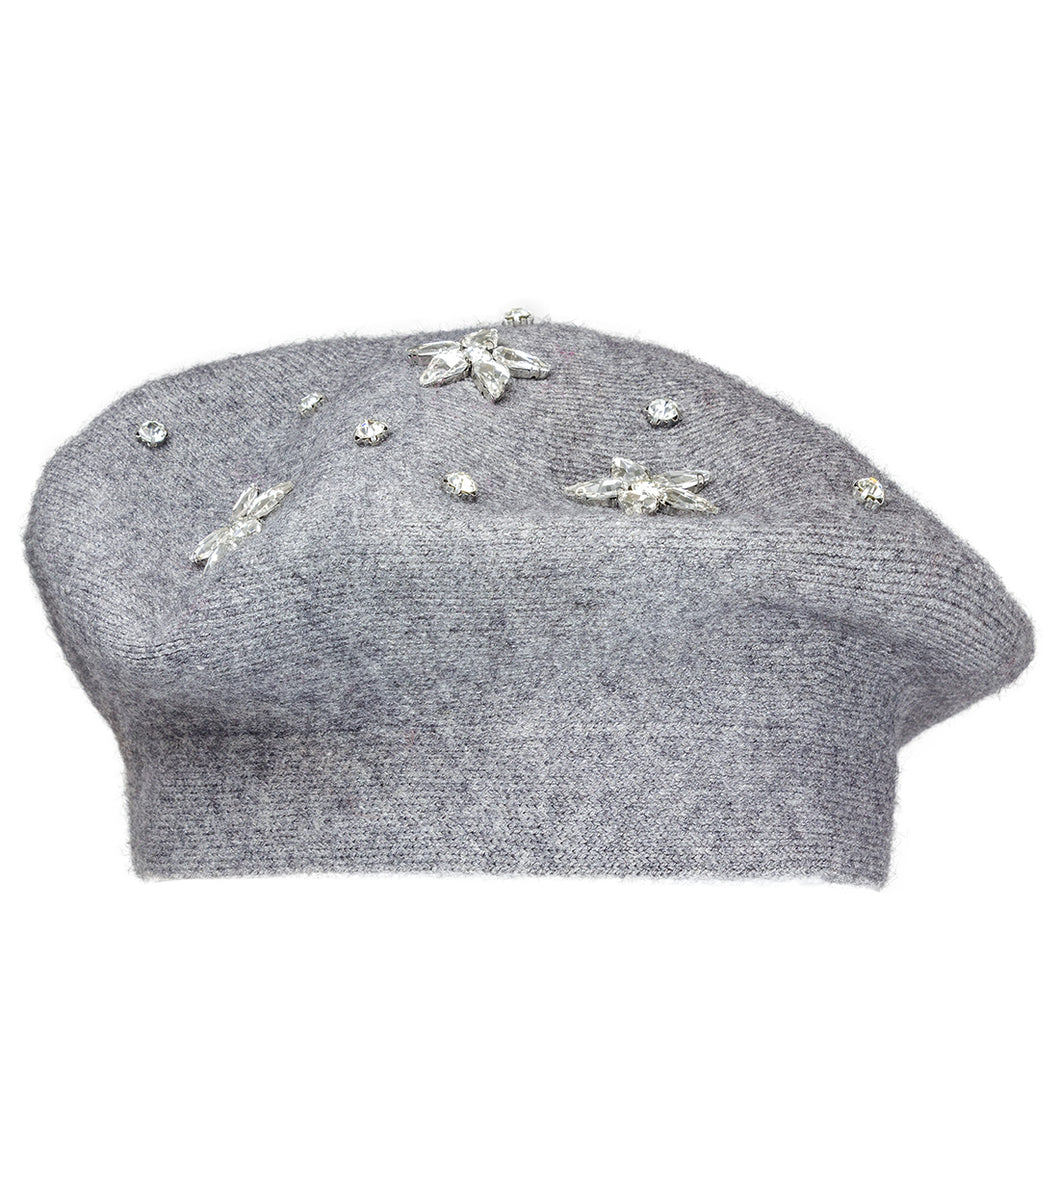 Solid Knit Beret Hat with Rhinestone Floral Embellishment - Just Jamie